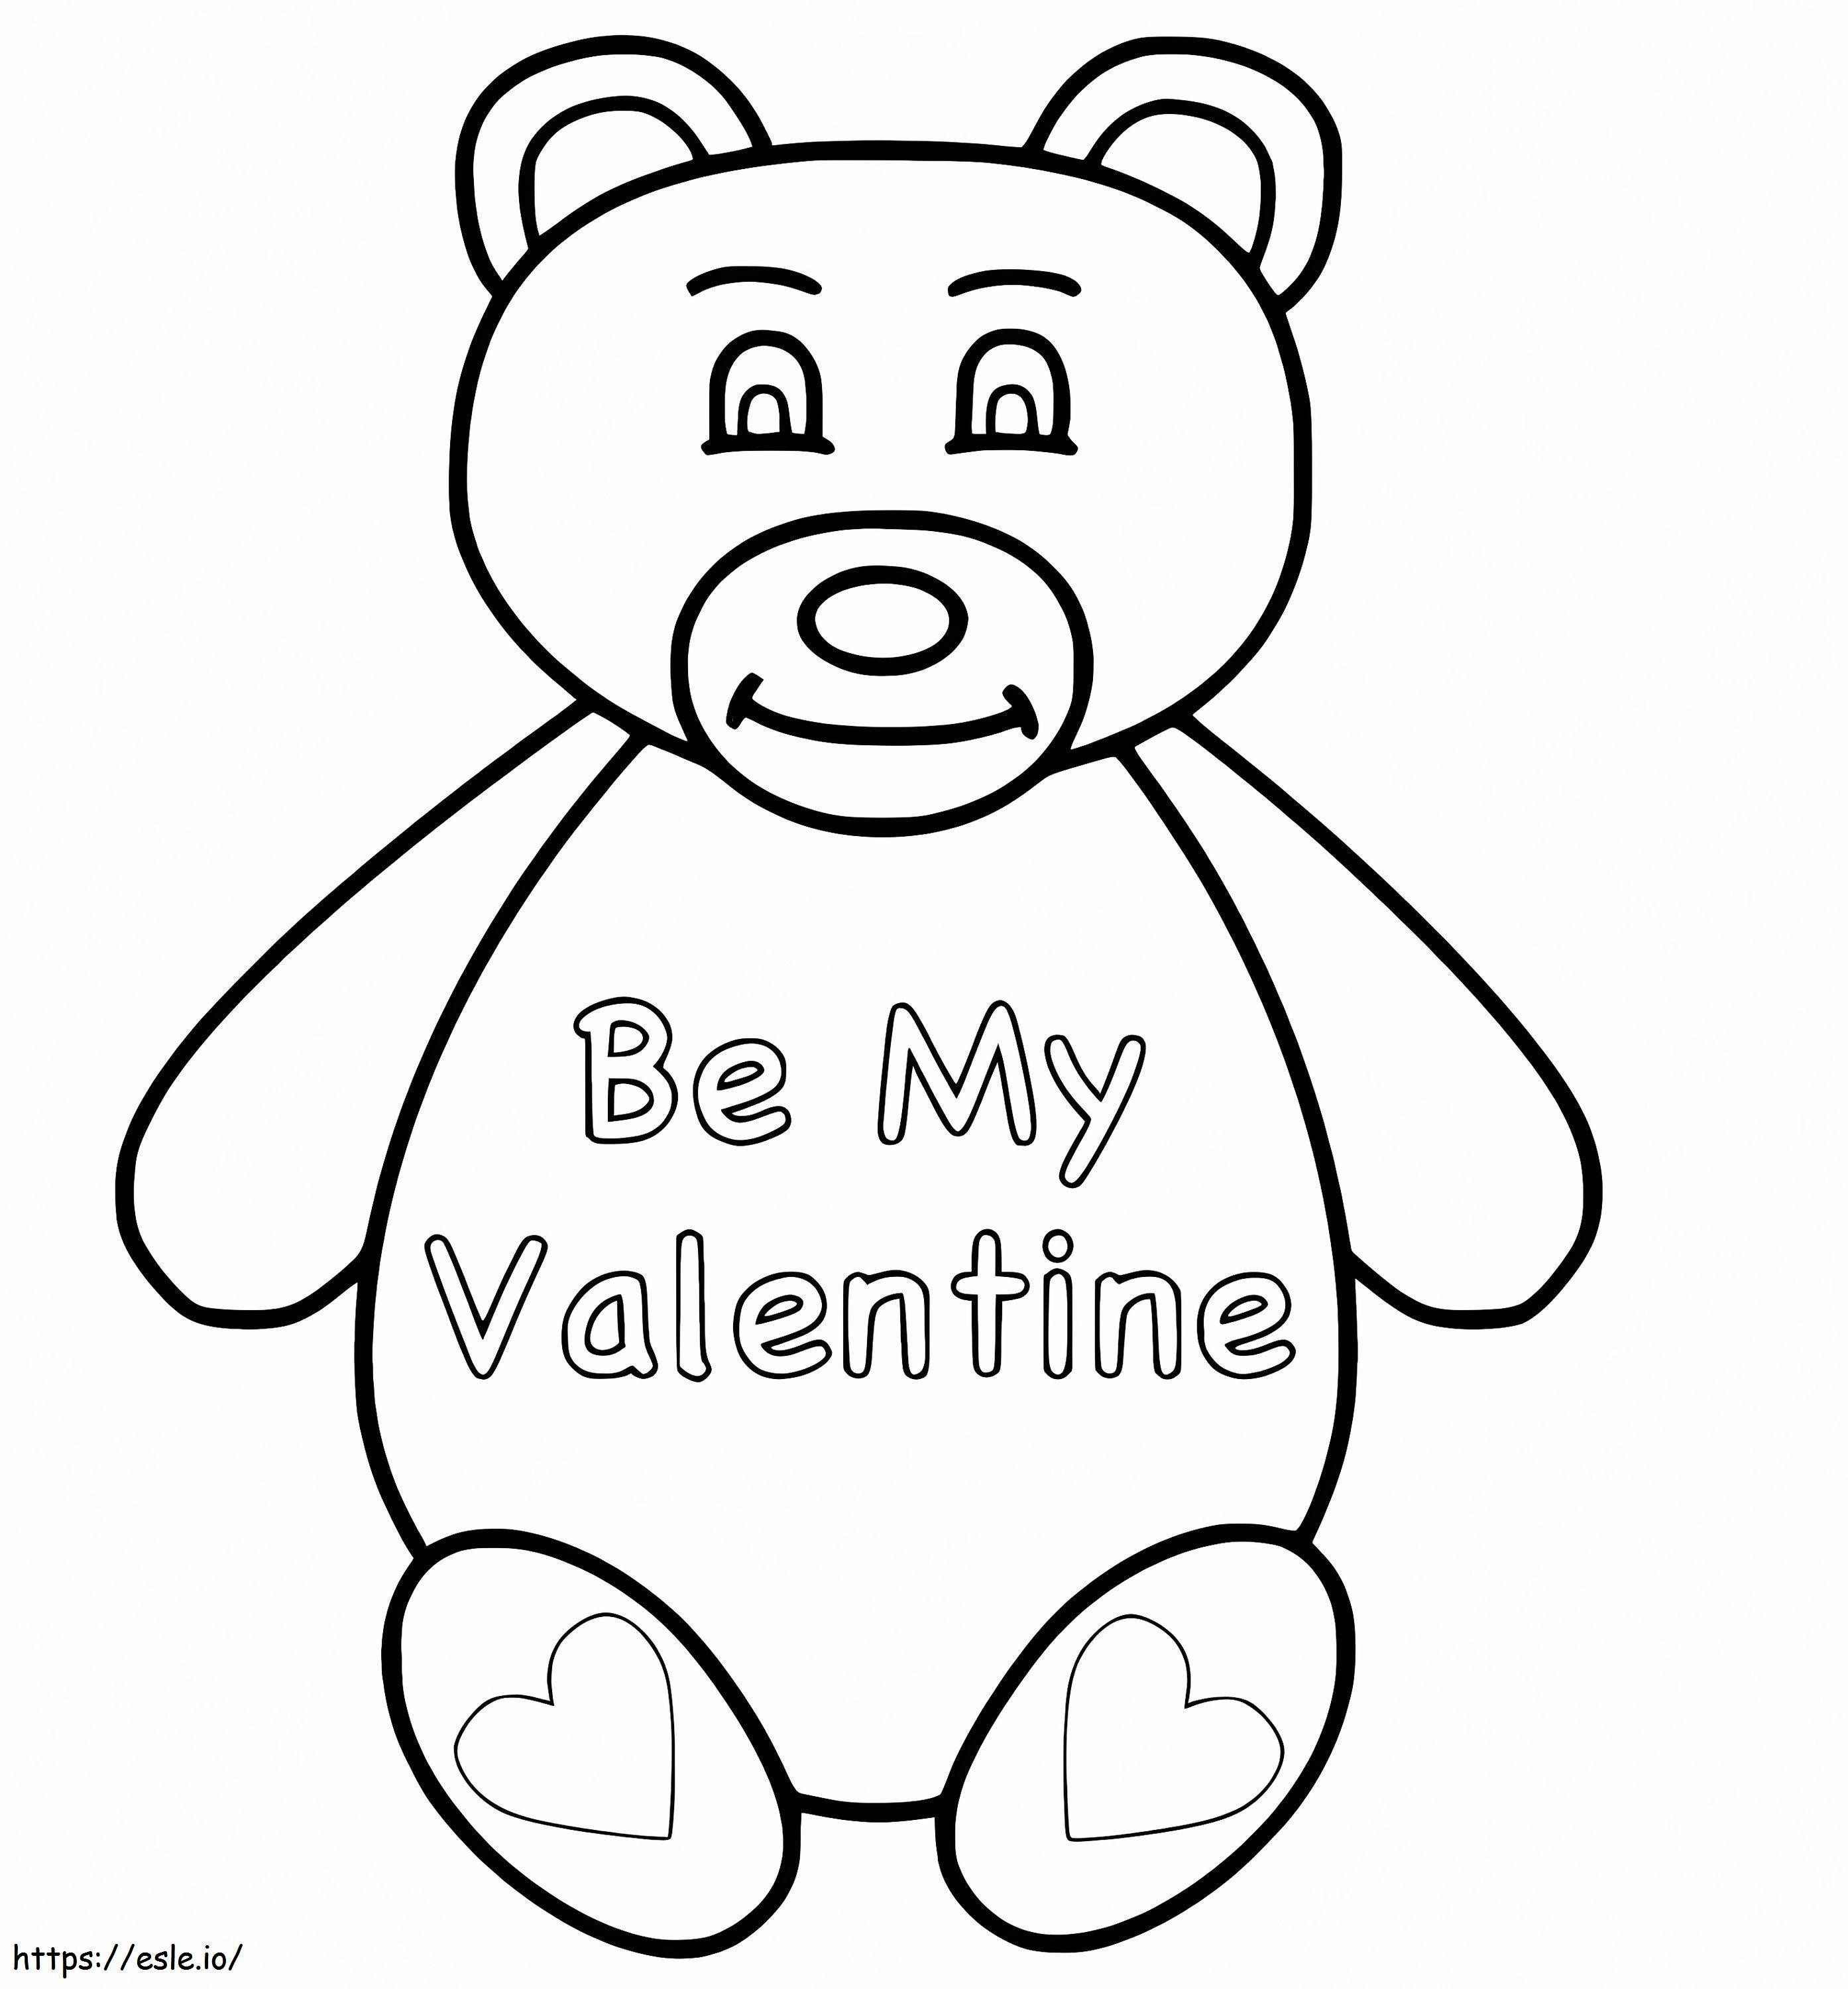 Be My Valentine Teddy Bear coloring page